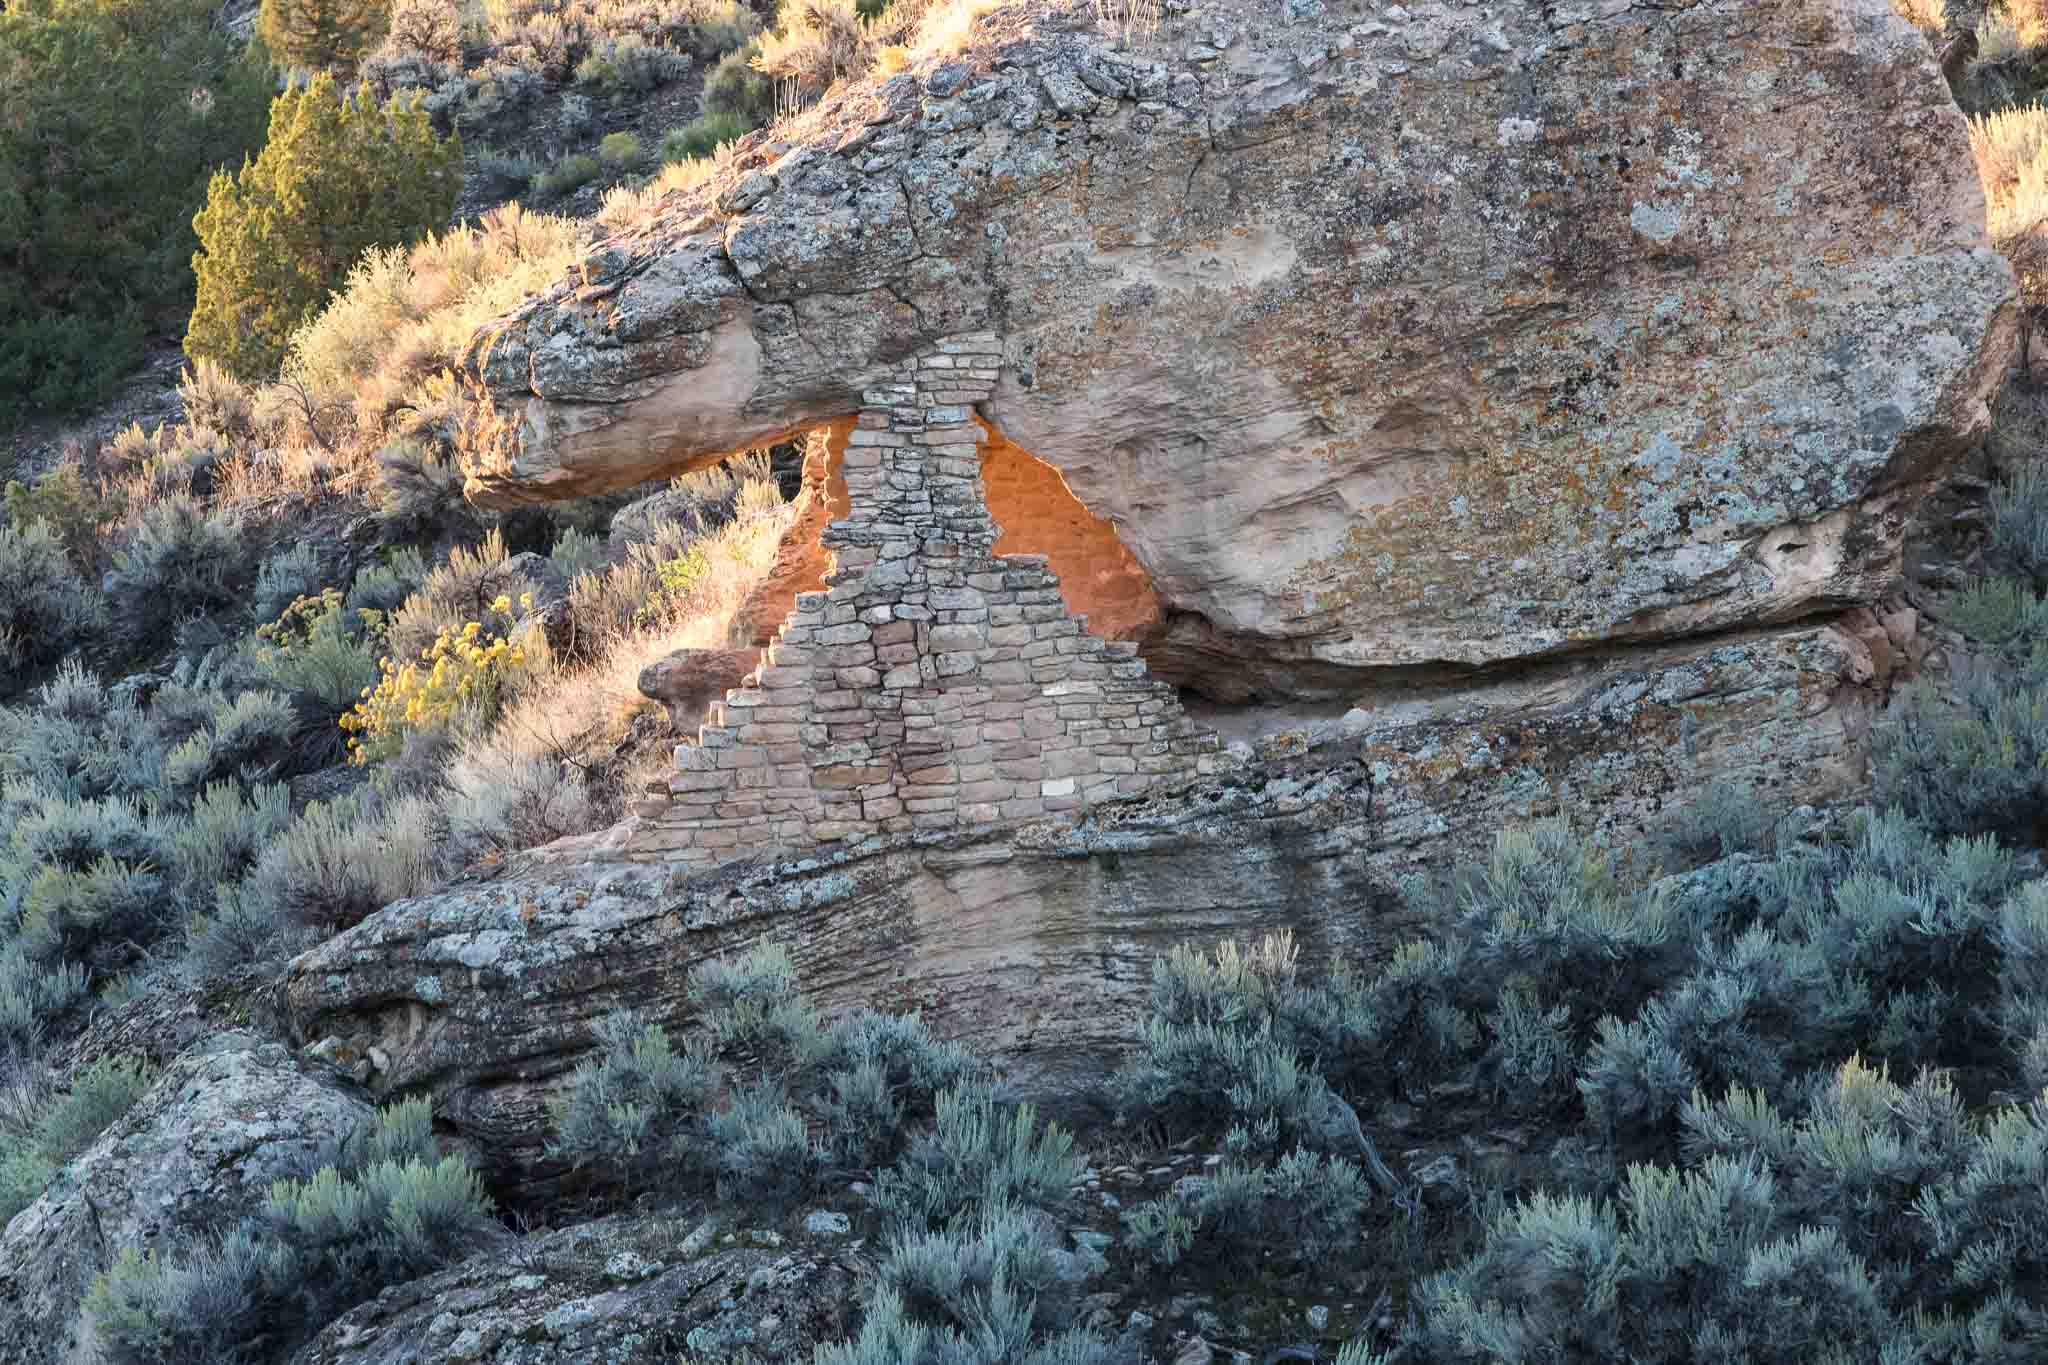 A view of Eroded Boulder House backlit by the rising sun showing a touch pareidolia, Hovenweep National Monument, Aneth UT, October 1, 2016